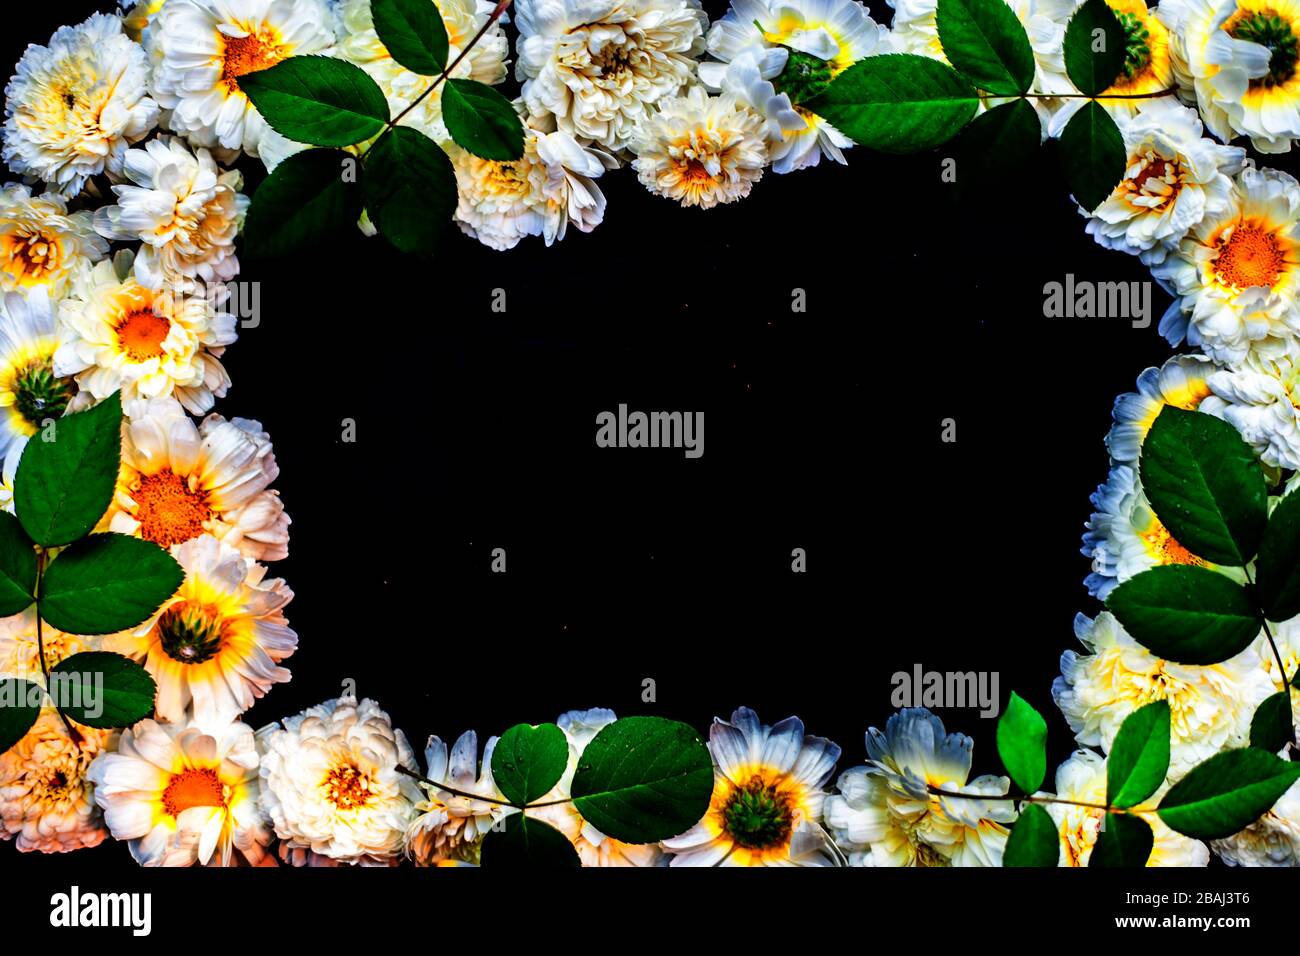 Shot of a bunch of common daisies or English daisy or daisy on black surface leaving a black rectangle shape in the centre for writing something.Horiz Stock Photo